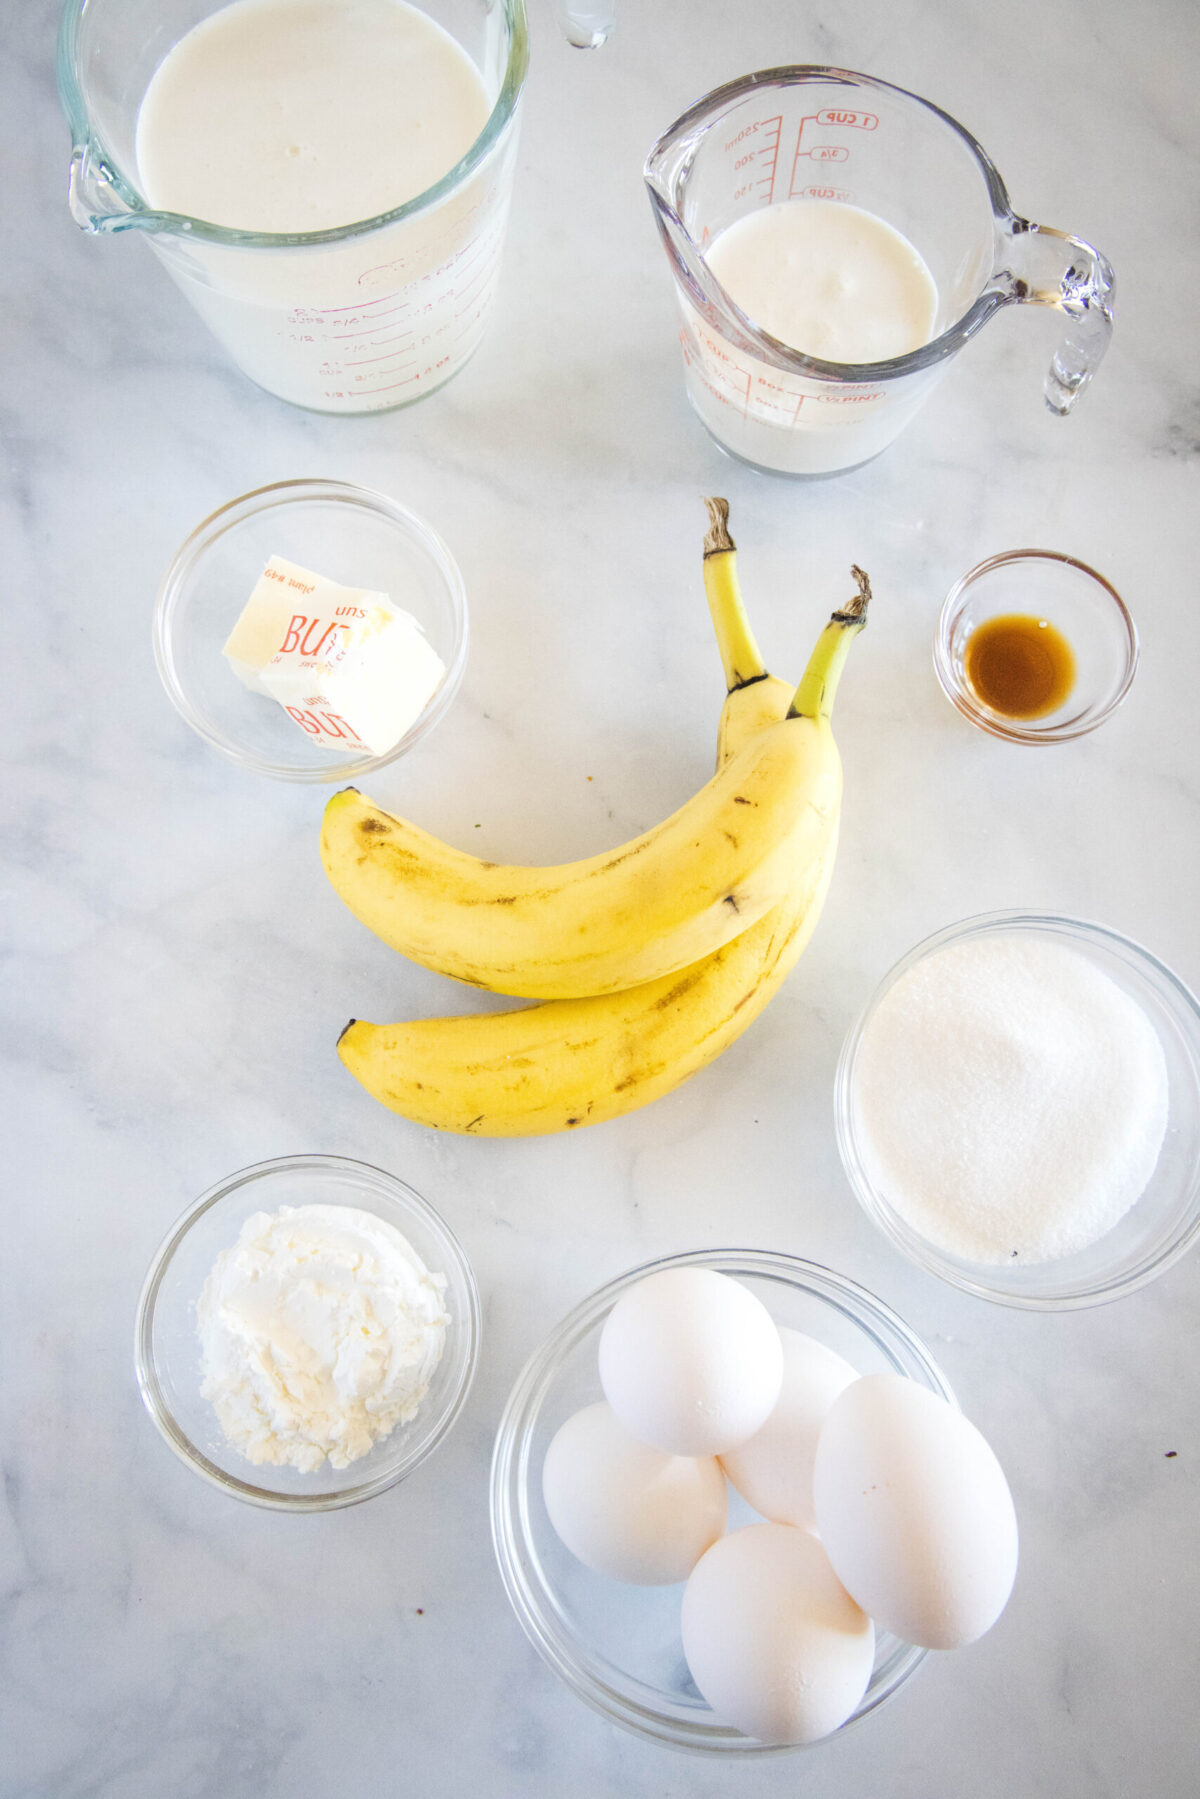 Overhead view of the ingredients needed for banana cream pie: a bowl of eggs, a bowl of sugar, a bowl of cornstarch, a bowl of butter, a bowl of milk, a bowl of cream, a bowl of vanilla, and two bananas